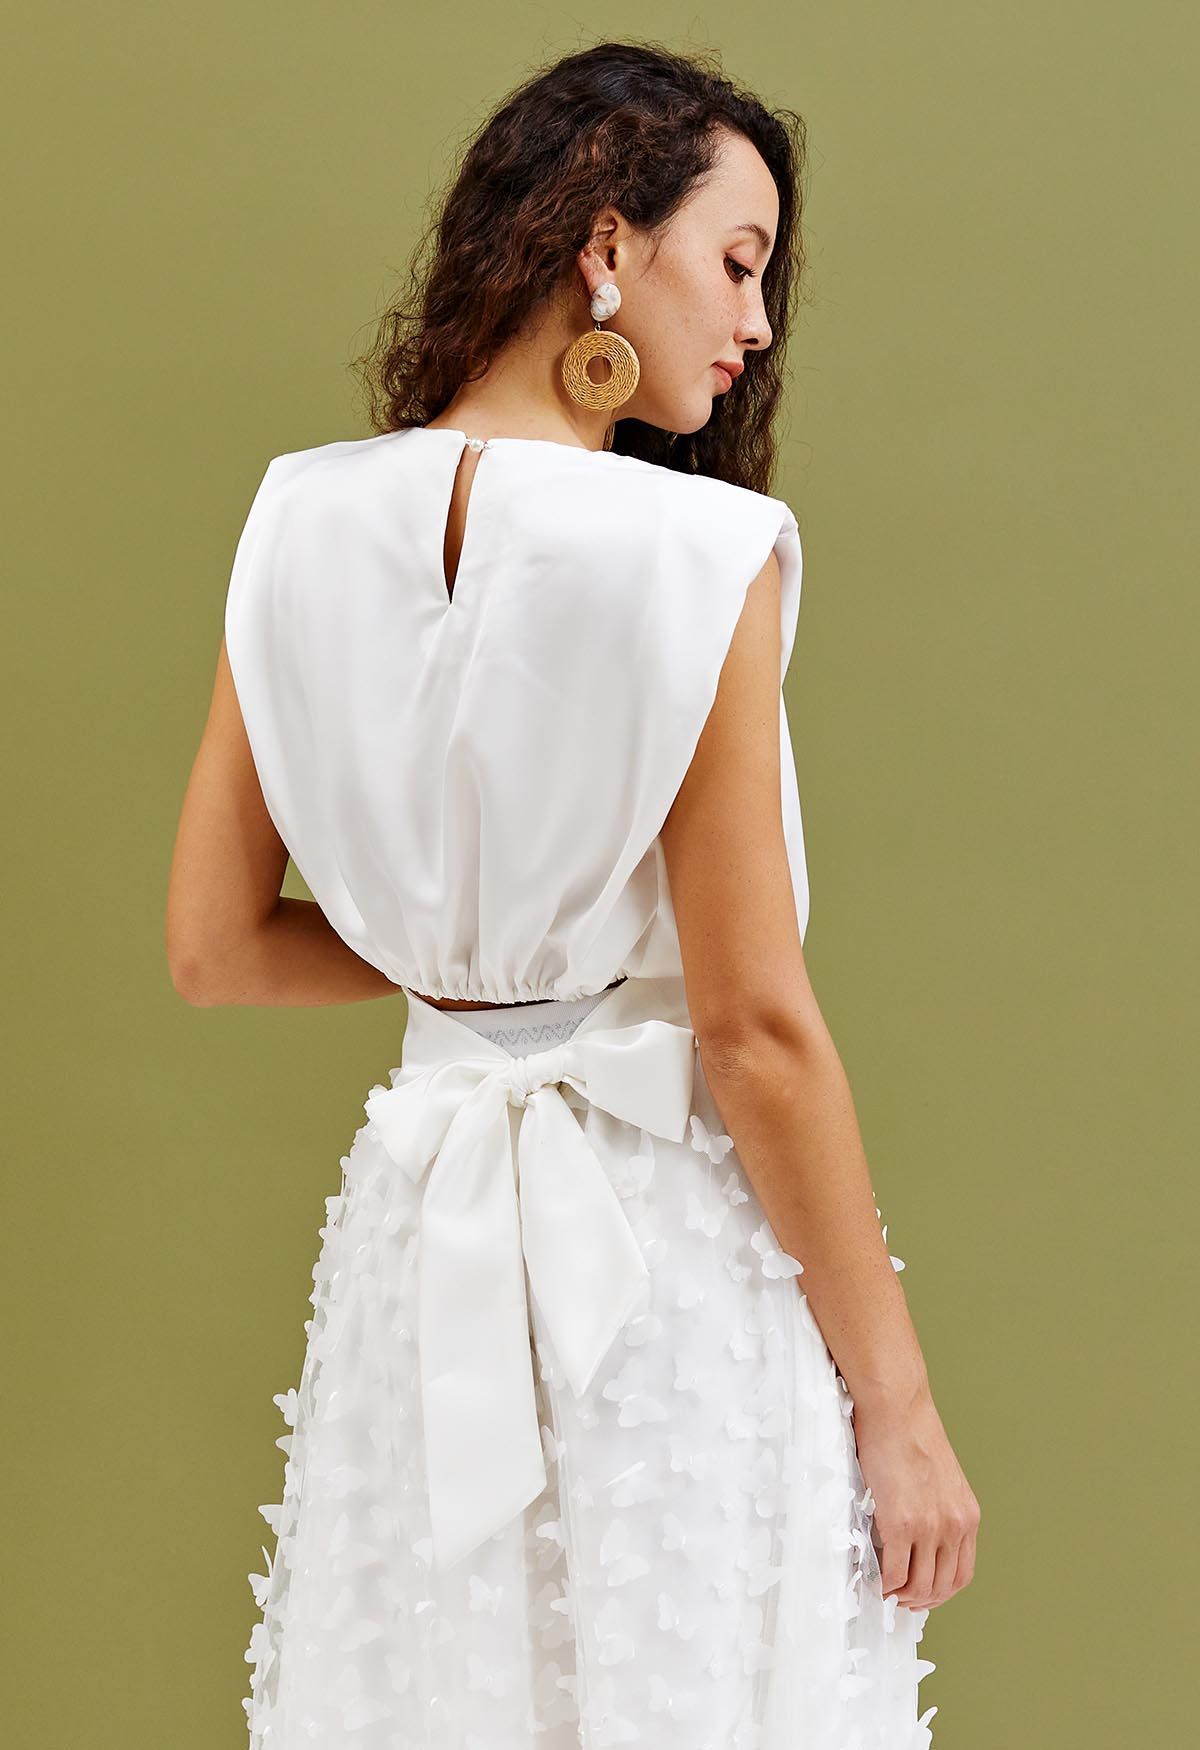 Satin Tie Back Sleeveless Top in White | Chicwish